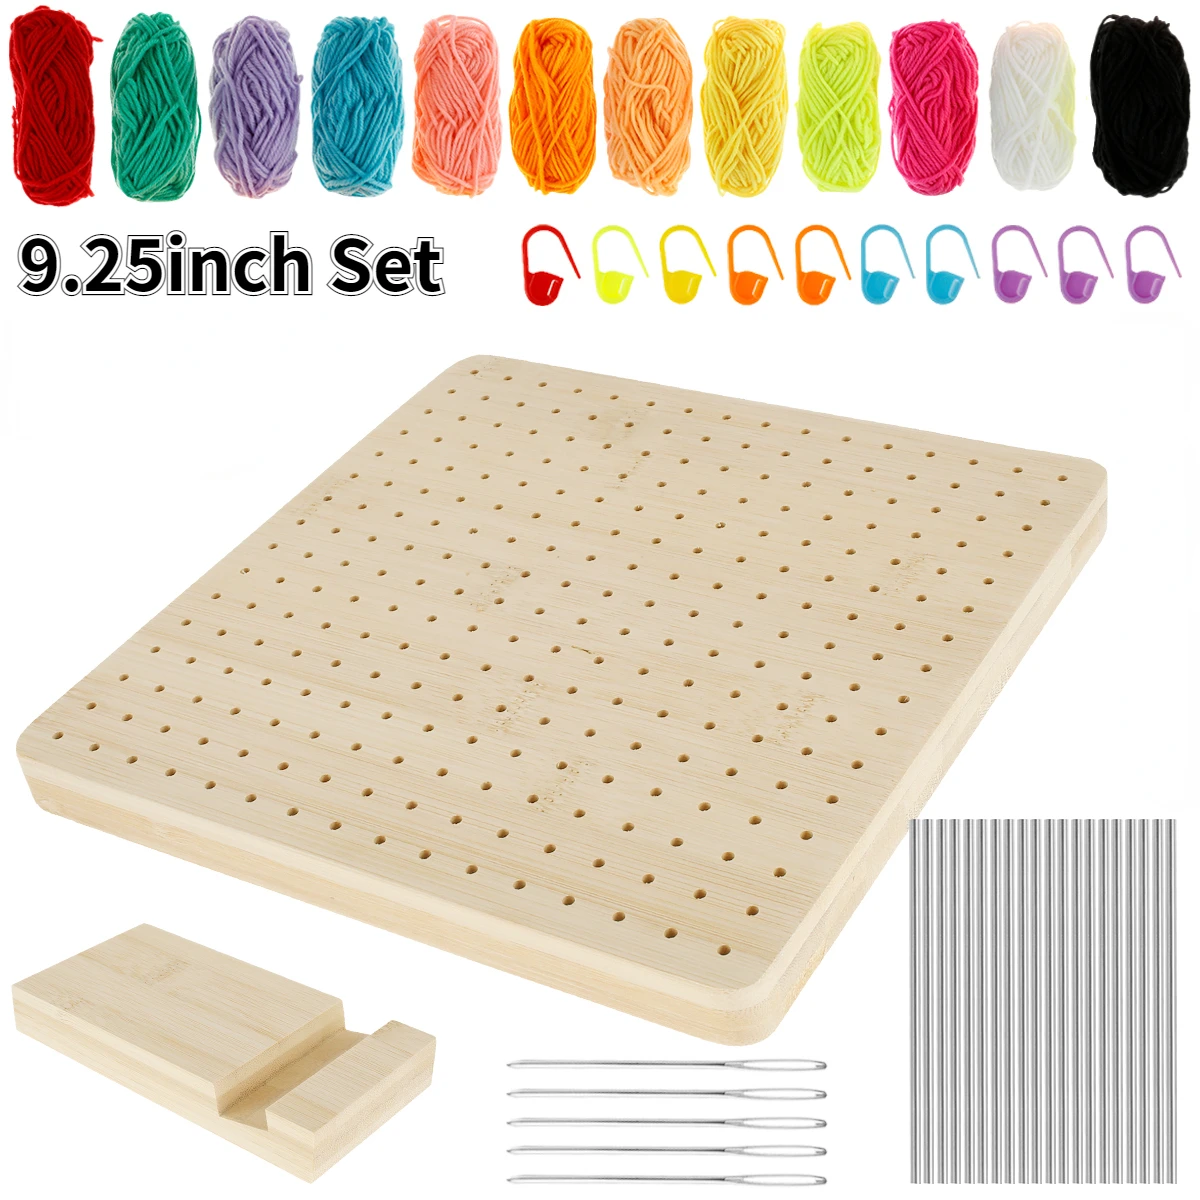 9.25in Crochet Blocking Board with 20Pins Sycamore Wood Square Blocking  Board w/ 12Colored Yarn and Stitch Marker Knitting Board - AliExpress